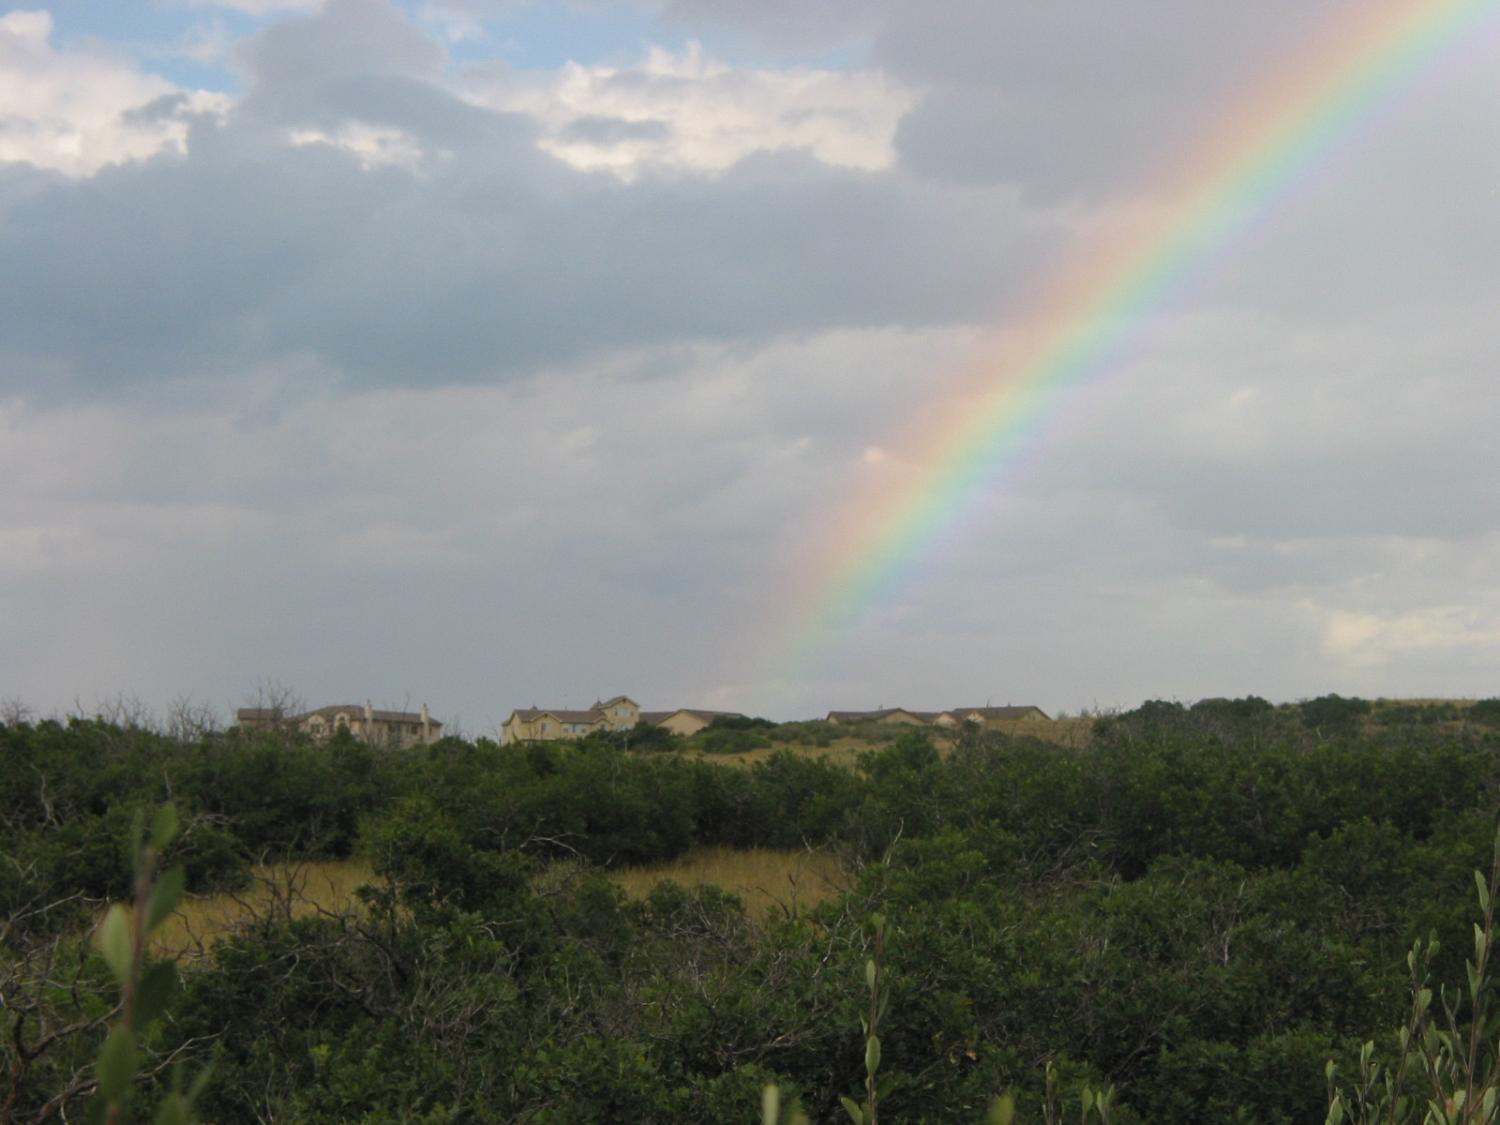 Rainbow as seen from Tenderfoot Trail on August 19, 2010